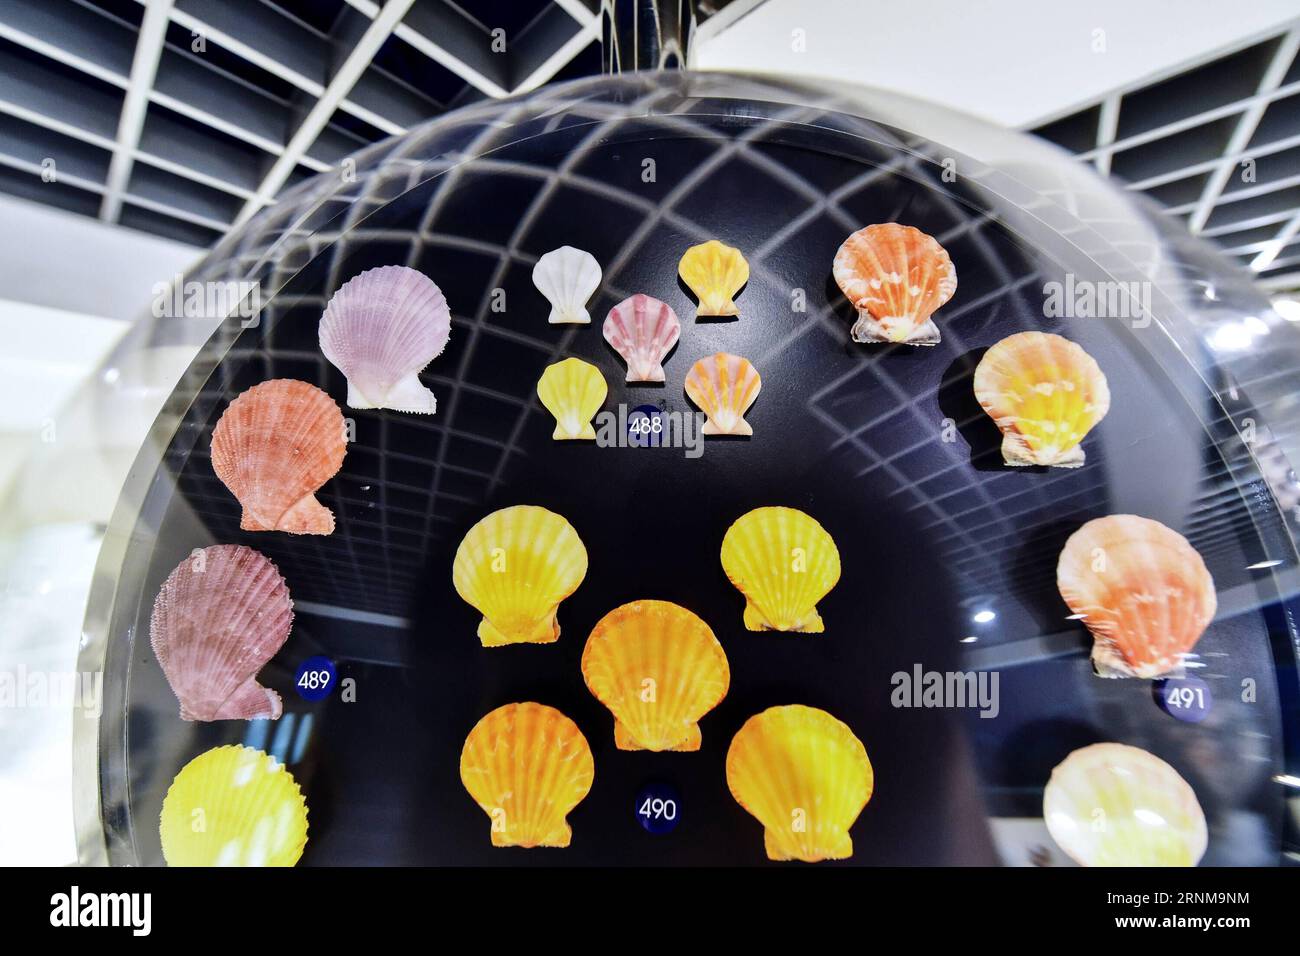 (170518) -- BANGKOK, May 18, 2017 -- The shells of various scallops are displayed at the Bangkok Seashell Museum in Bangkok, Thailand, May 18, 2017. Embracing a collection of over 3,000 specimens of 600 species, the Bangkok Seashell Museum not only enchants its visitors with a kaleidoscope of natural shapes and colors, but also serves as a knowledge source for those interested in the evolution and classification of shelled animals. ) (hy) THAILAND-BANGKOK-SEASHELL-MUSEUM-COLLECTION LixMangmang PUBLICATIONxNOTxINxCHN   Bangkok May 18 2017 The Shells of Various scallops are displayed AT The Bang Stock Photo